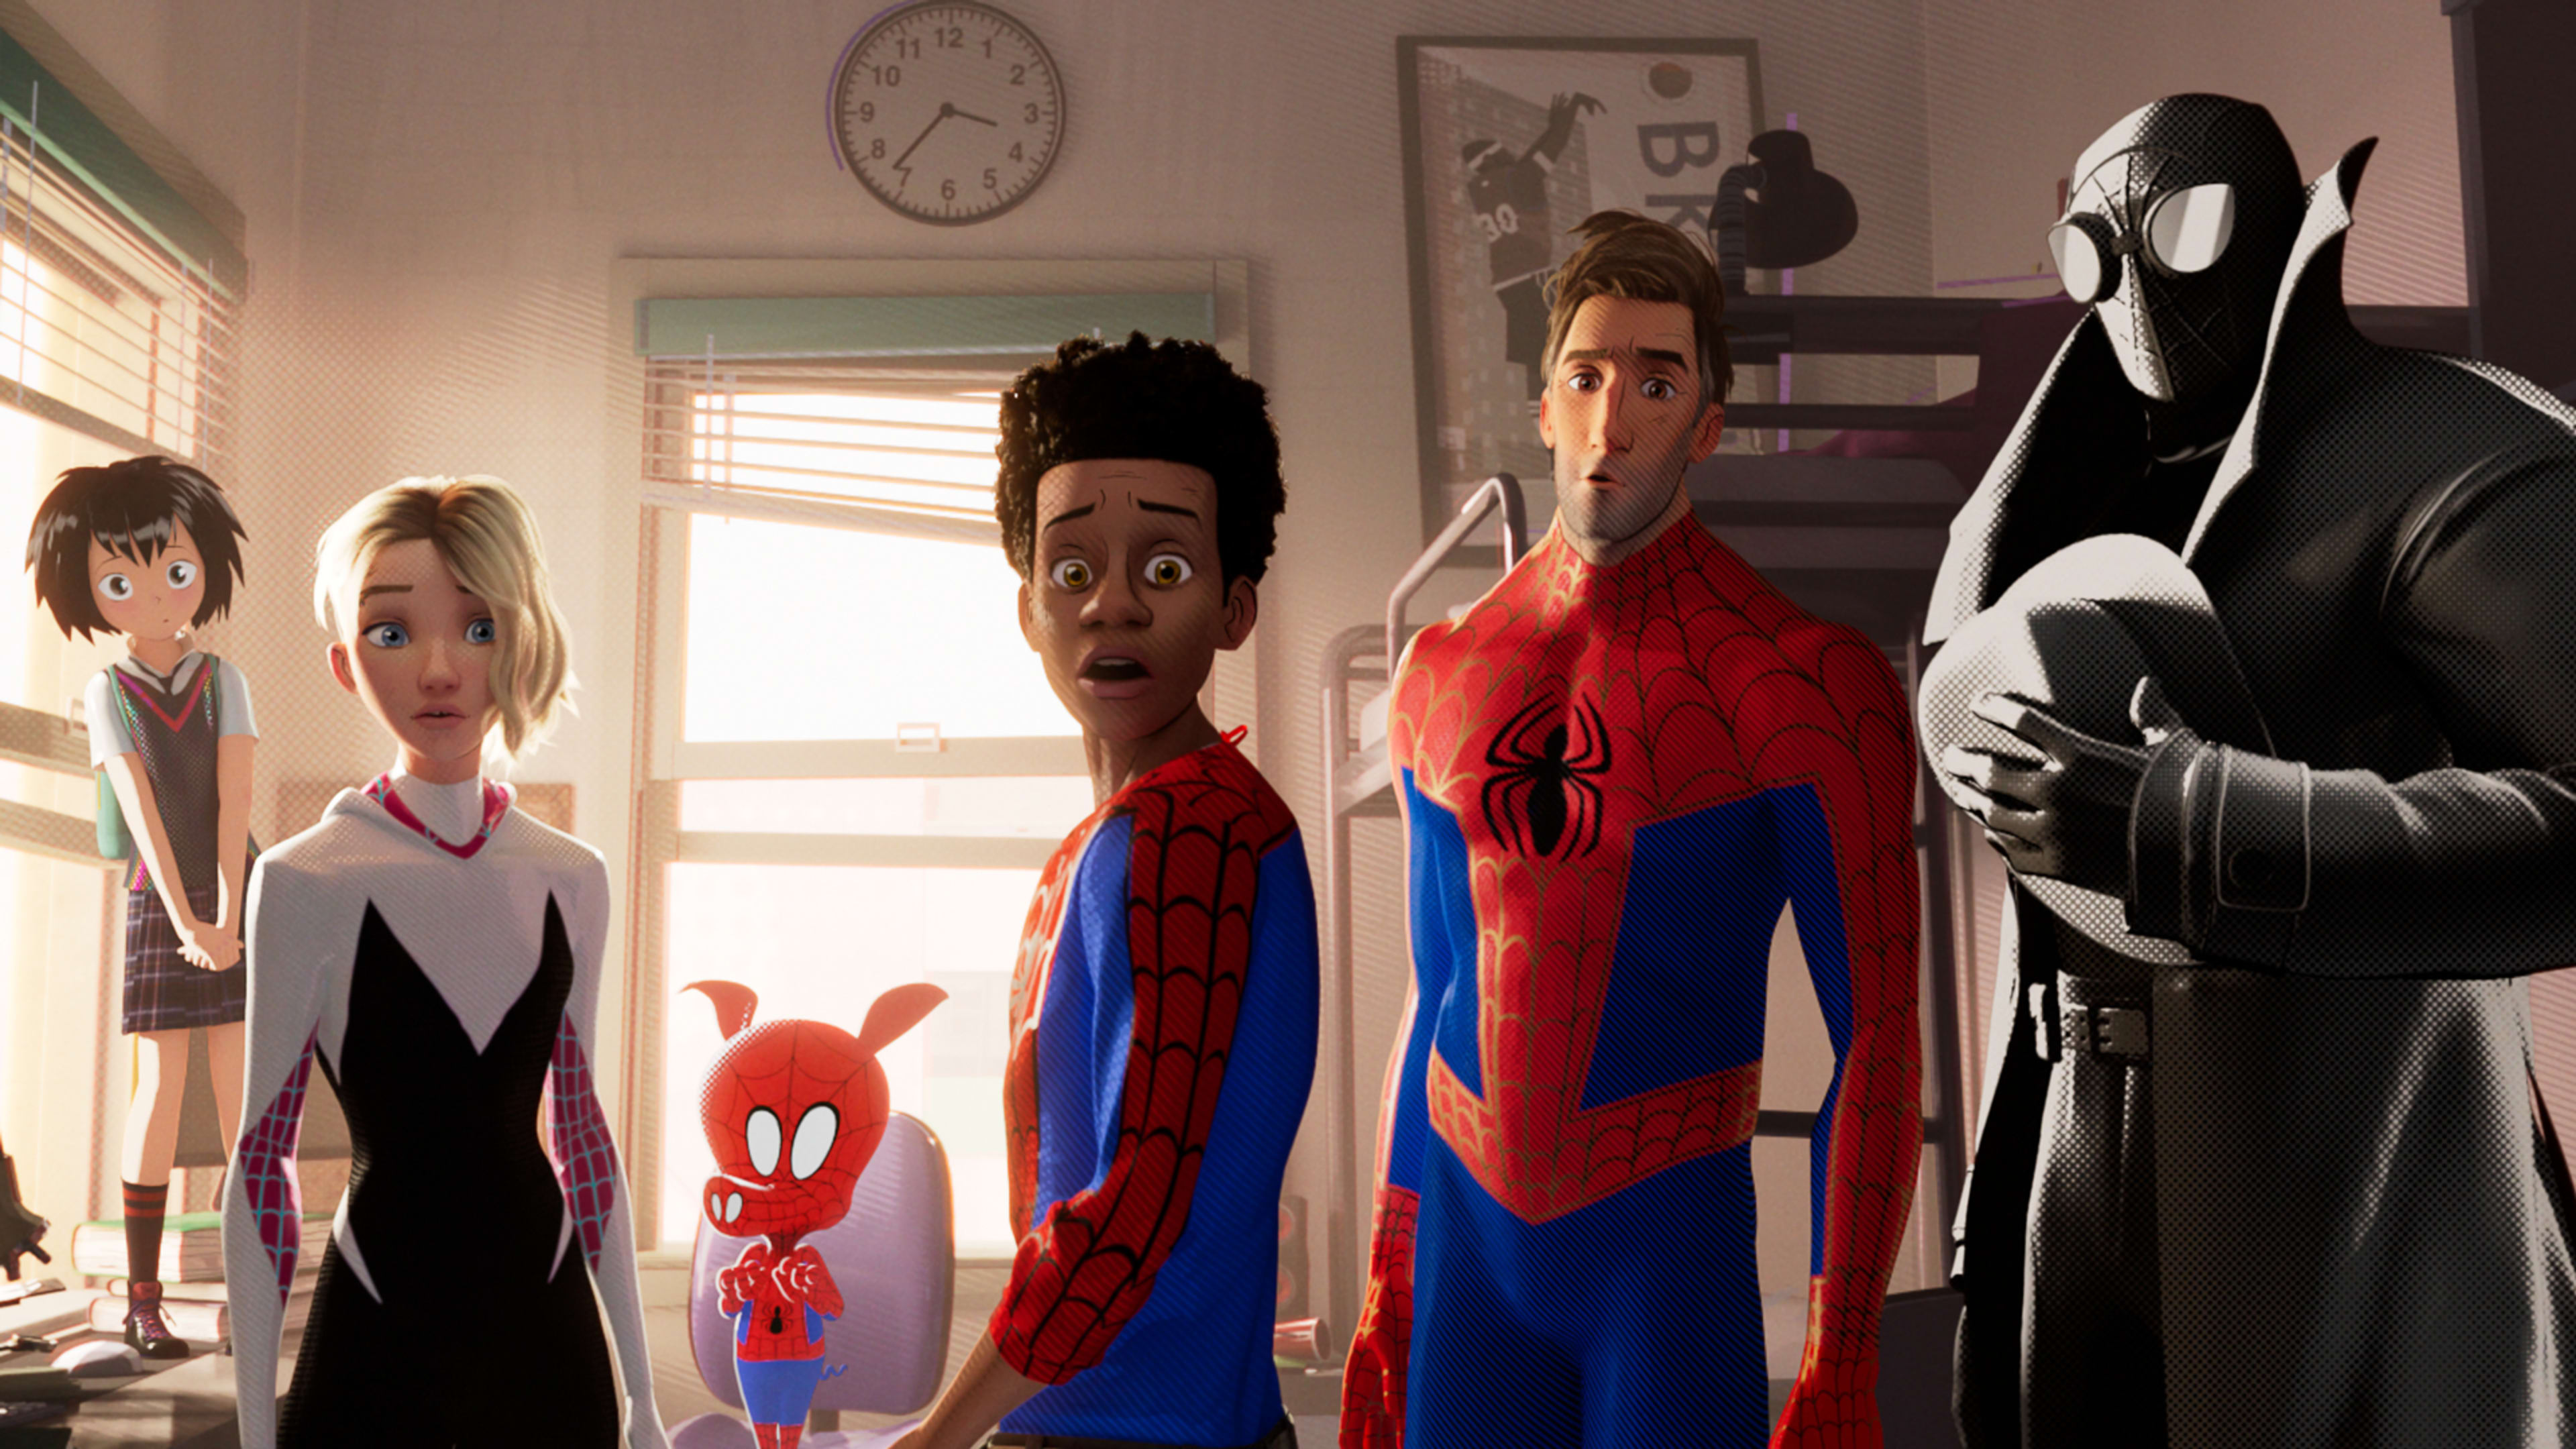 Inside the animation magic of “Spider-Man: Into the Spider-Verse”